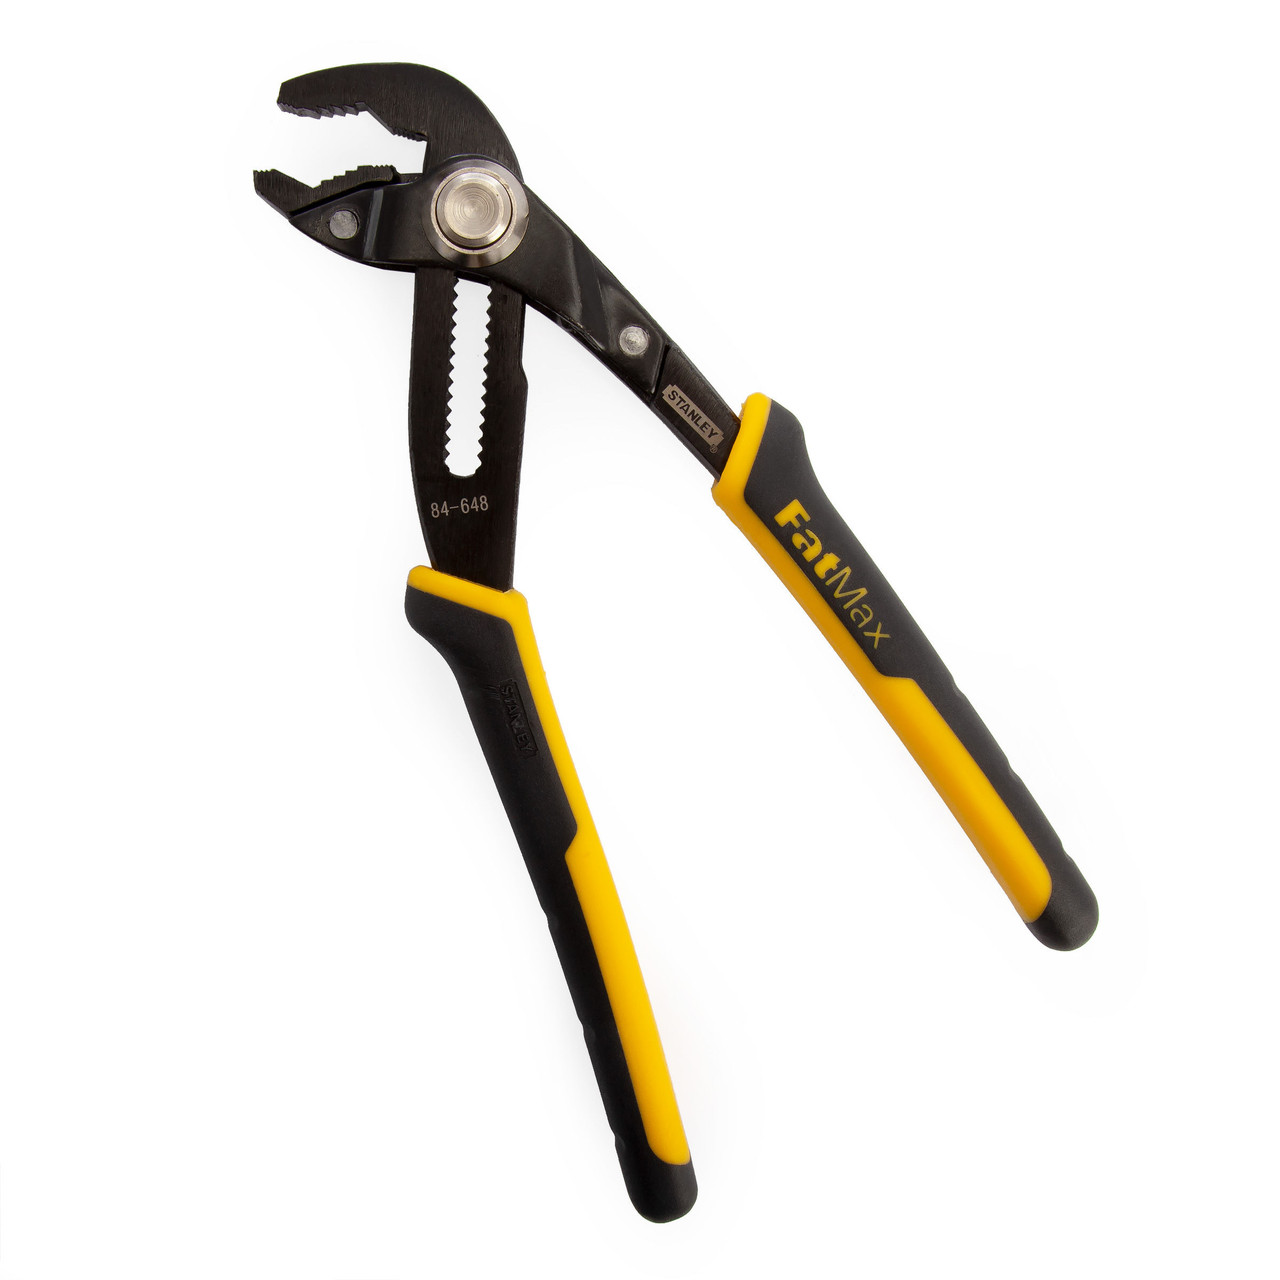 Photos - Knife / Multitool Stanley 0-84-648 FatMax Groove Joint Plier 250mm 